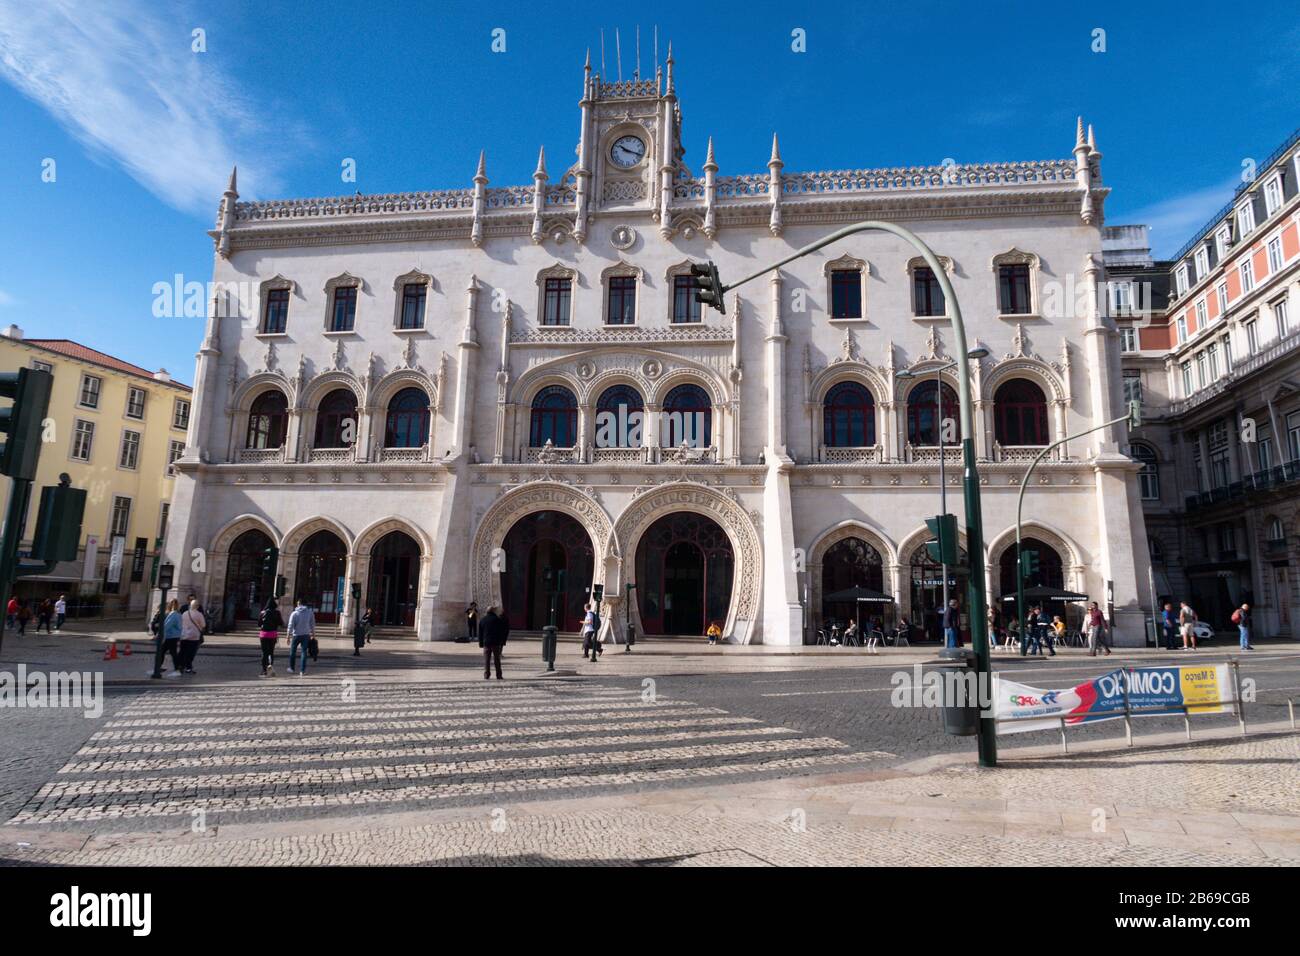 Lisbon, Portugal - 8 March 2020: facade of the Rossio Railway Station Stock Photo